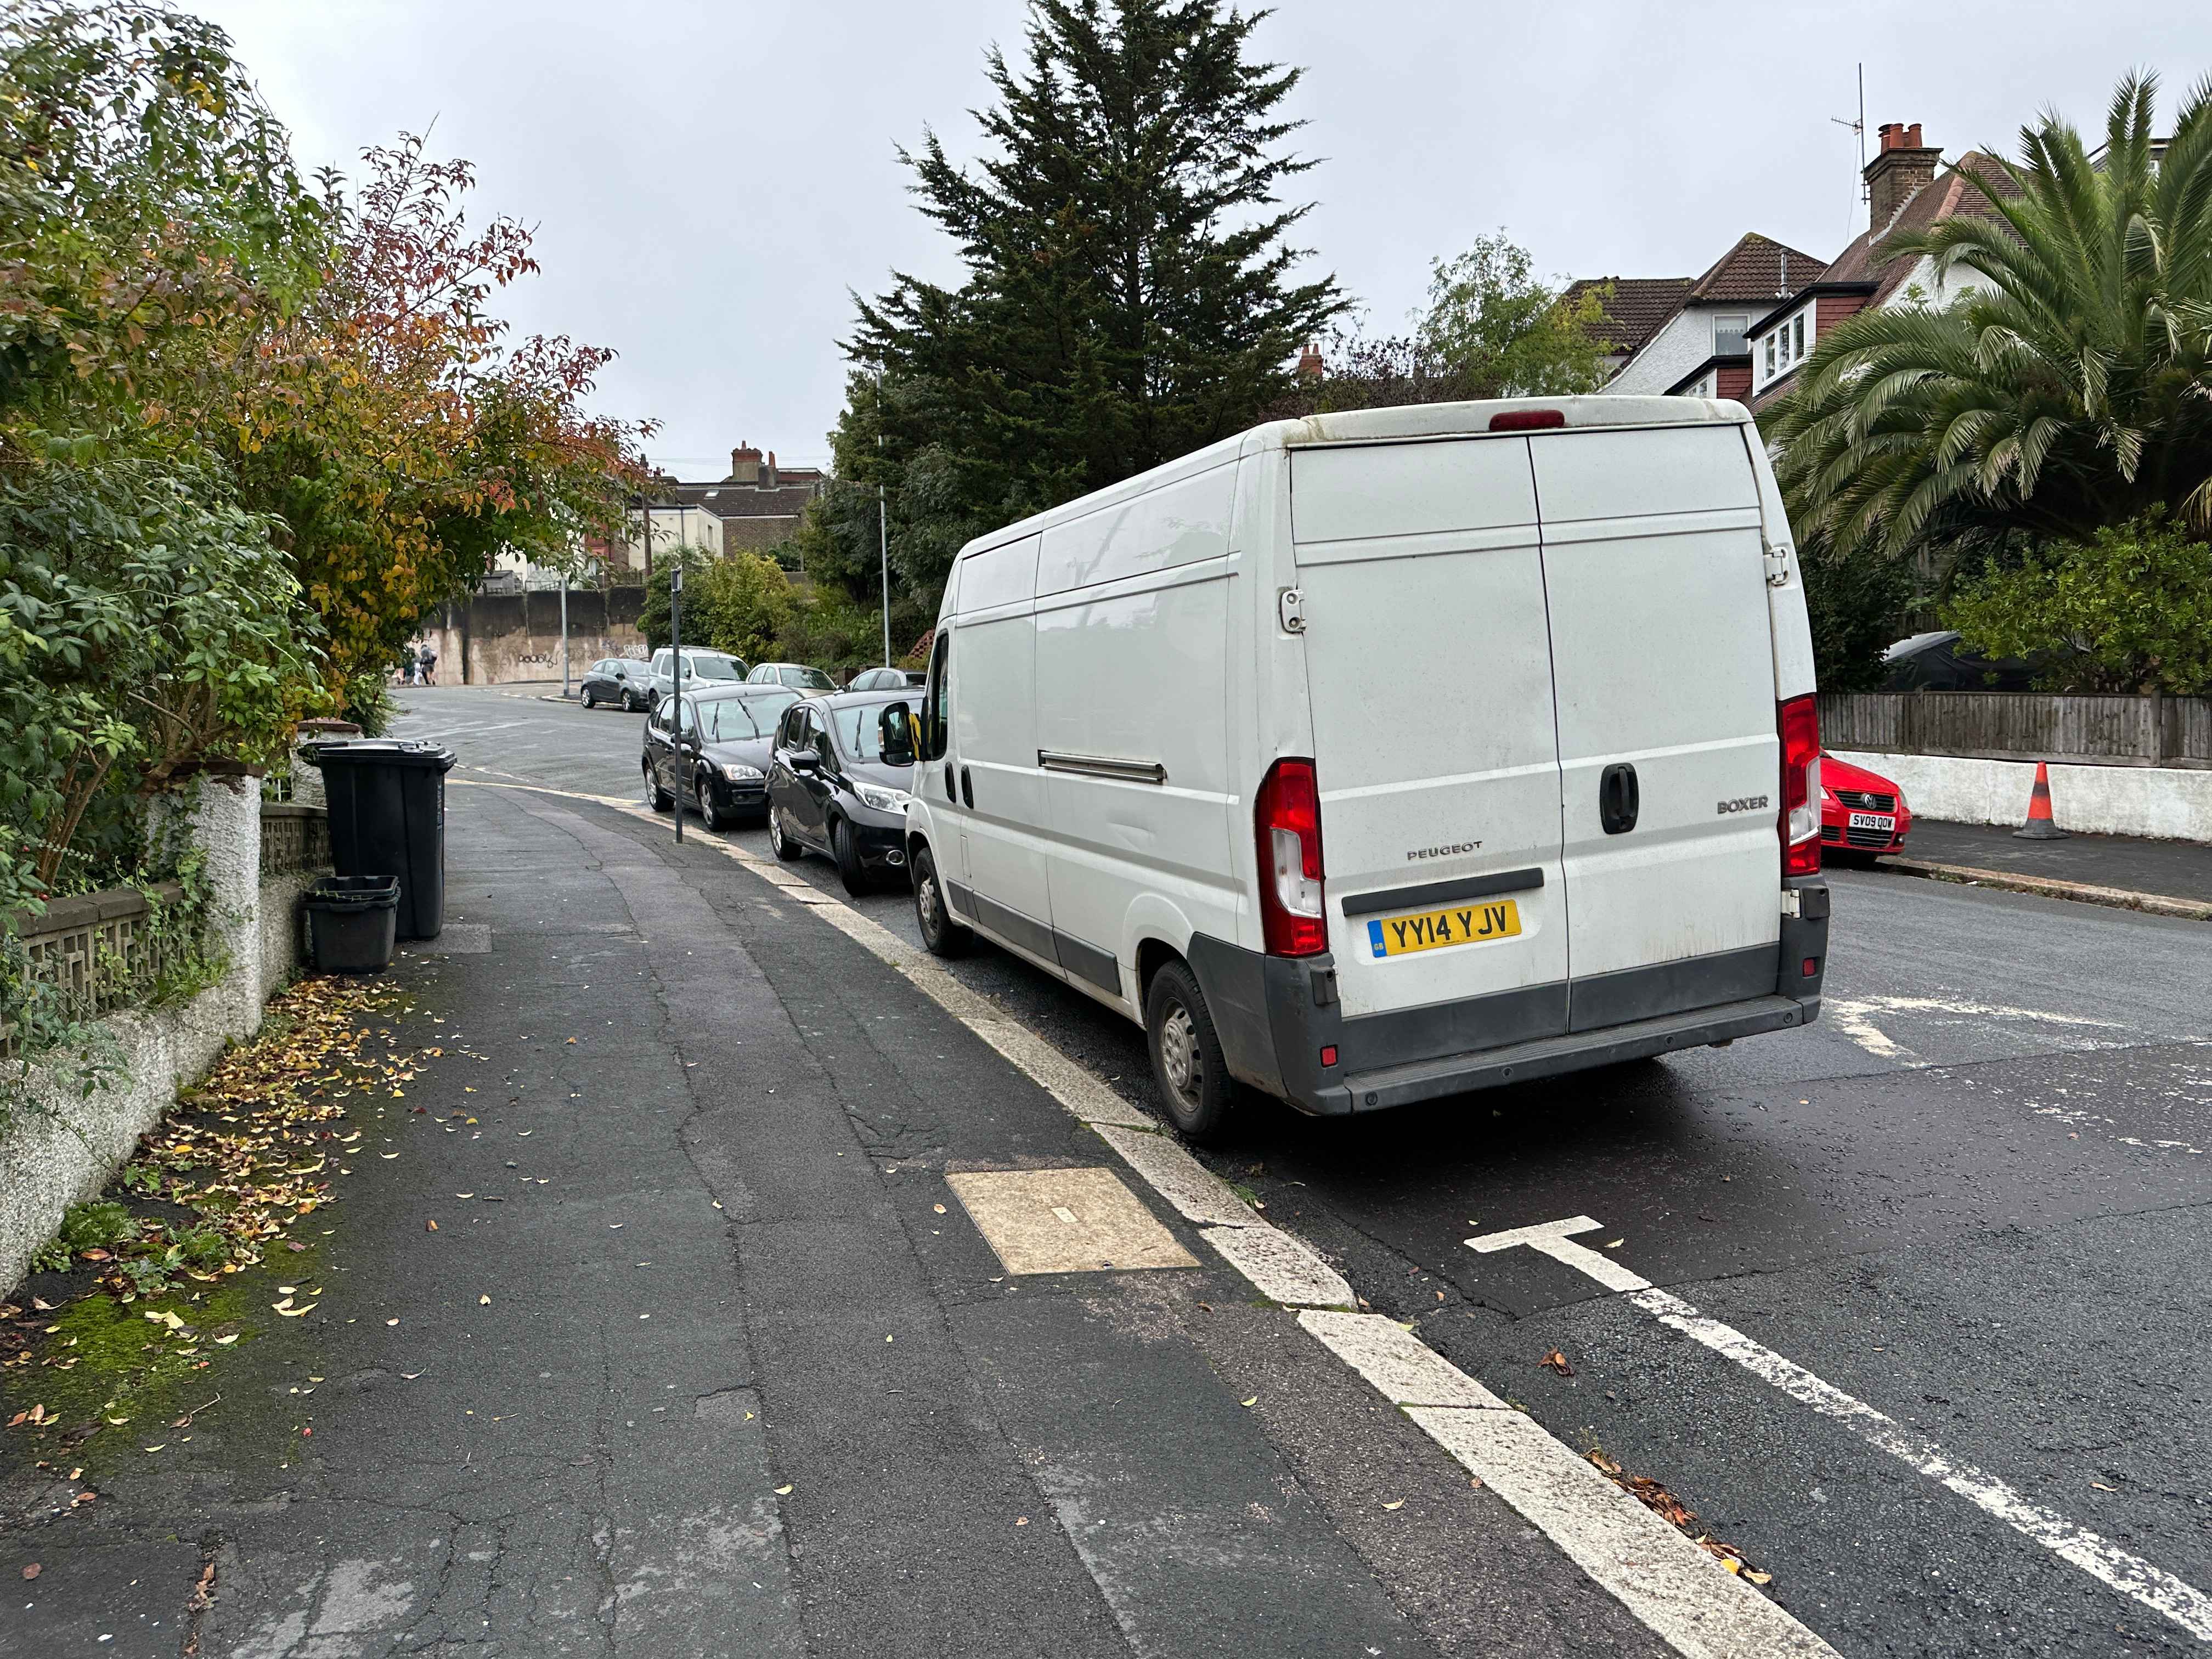 Photograph of YY14 YJV - a White Peugeot Boxer parked in Hollingdean by a non-resident. The second of three photographs supplied by the residents of Hollingdean.